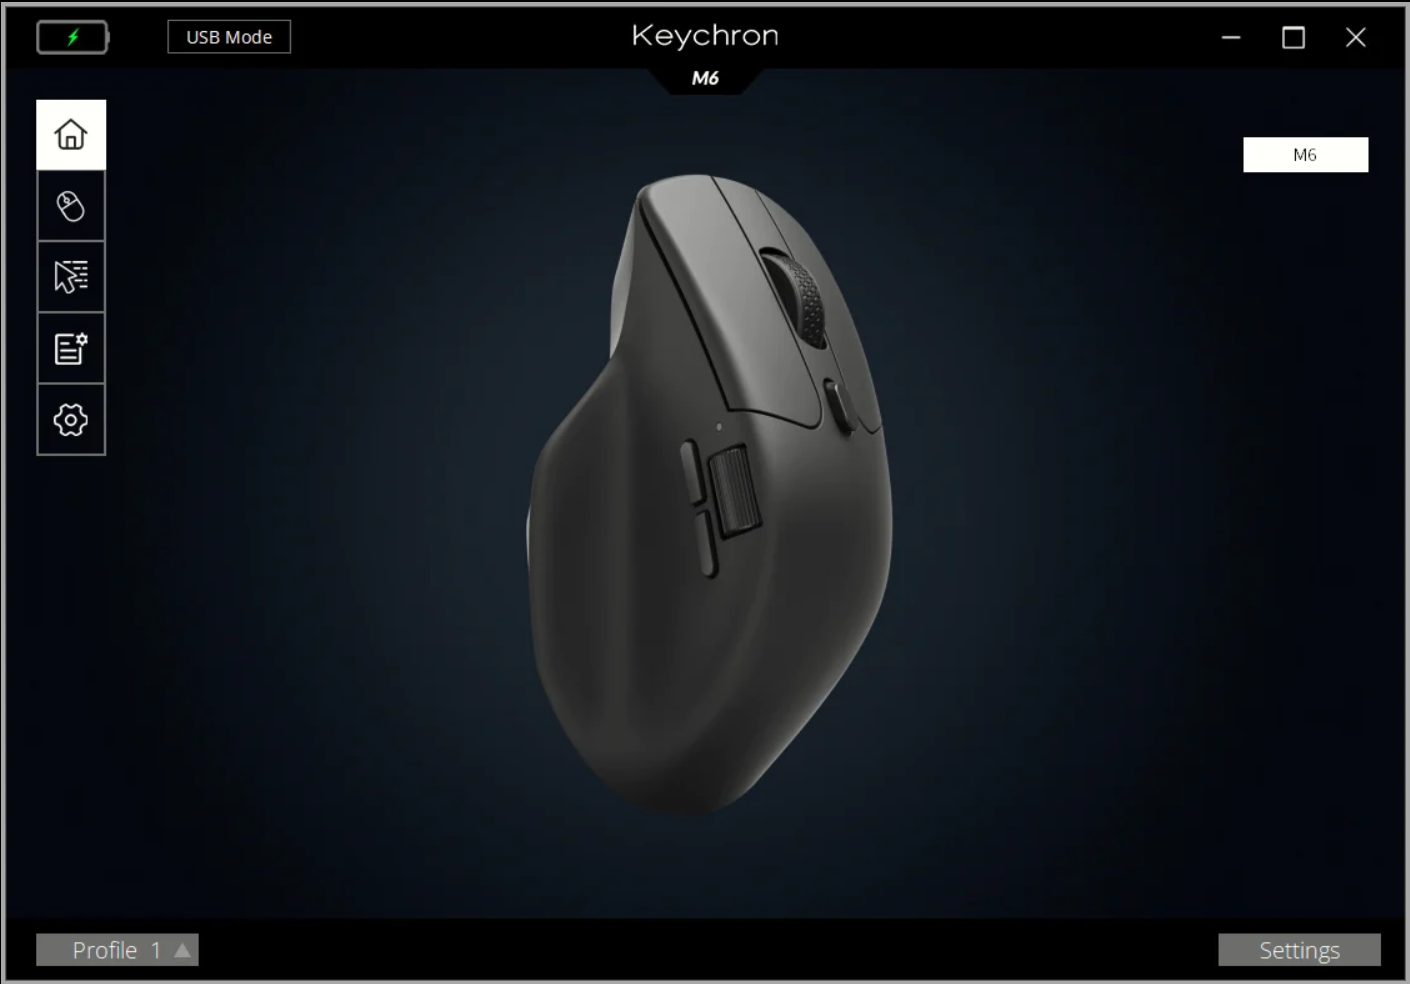 2024-01-24_16_29_07-Keychron_M6_Wireless_Mouse_Keychron___Mechanical_Keyboards_for_Mac_Windows_an.png